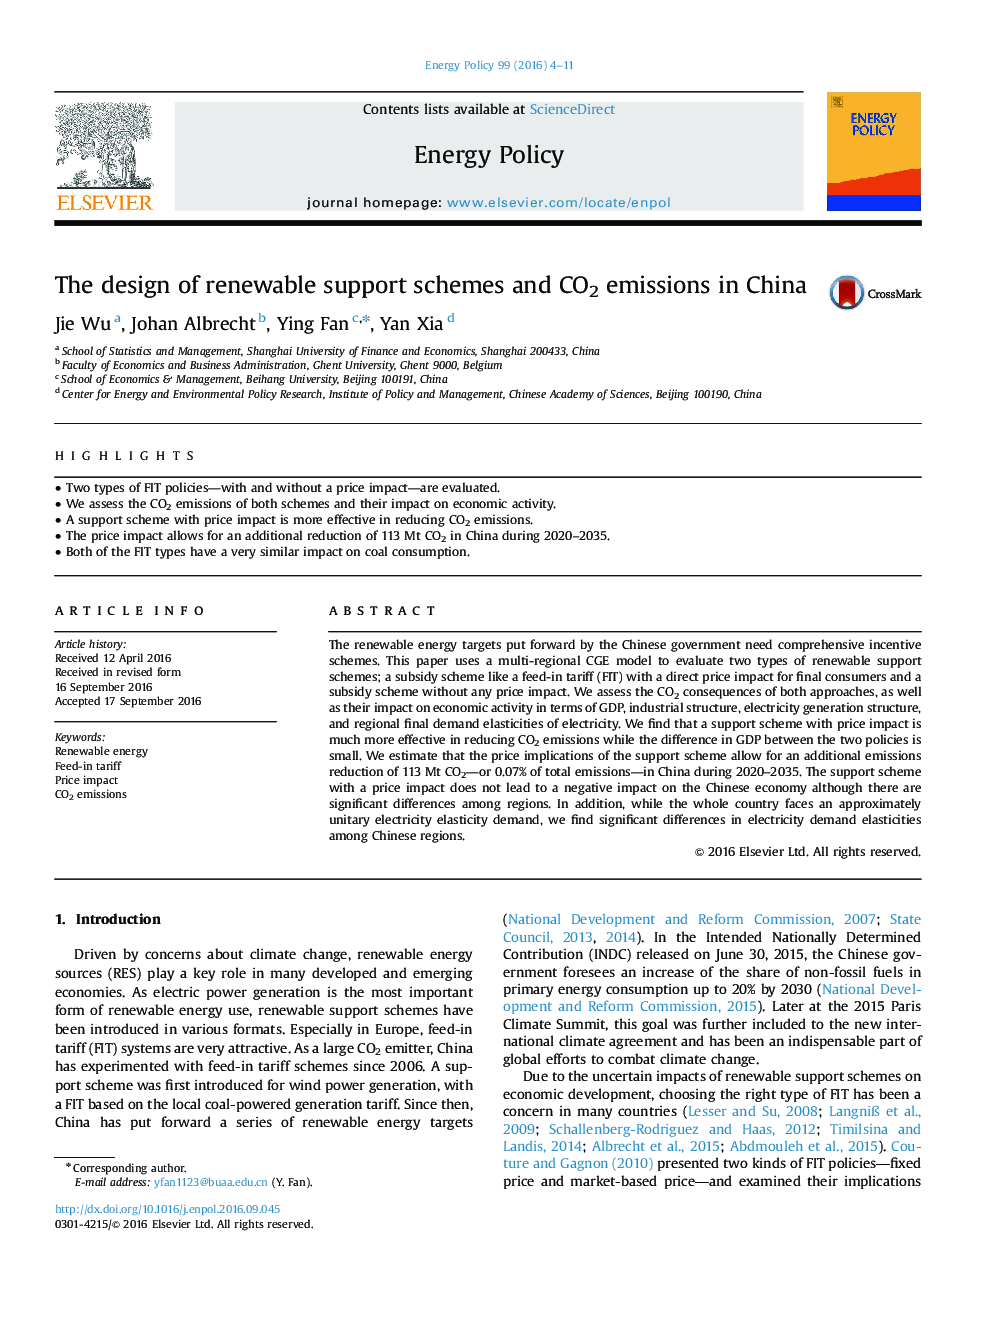 The design of renewable support schemes and CO2 emissions in China